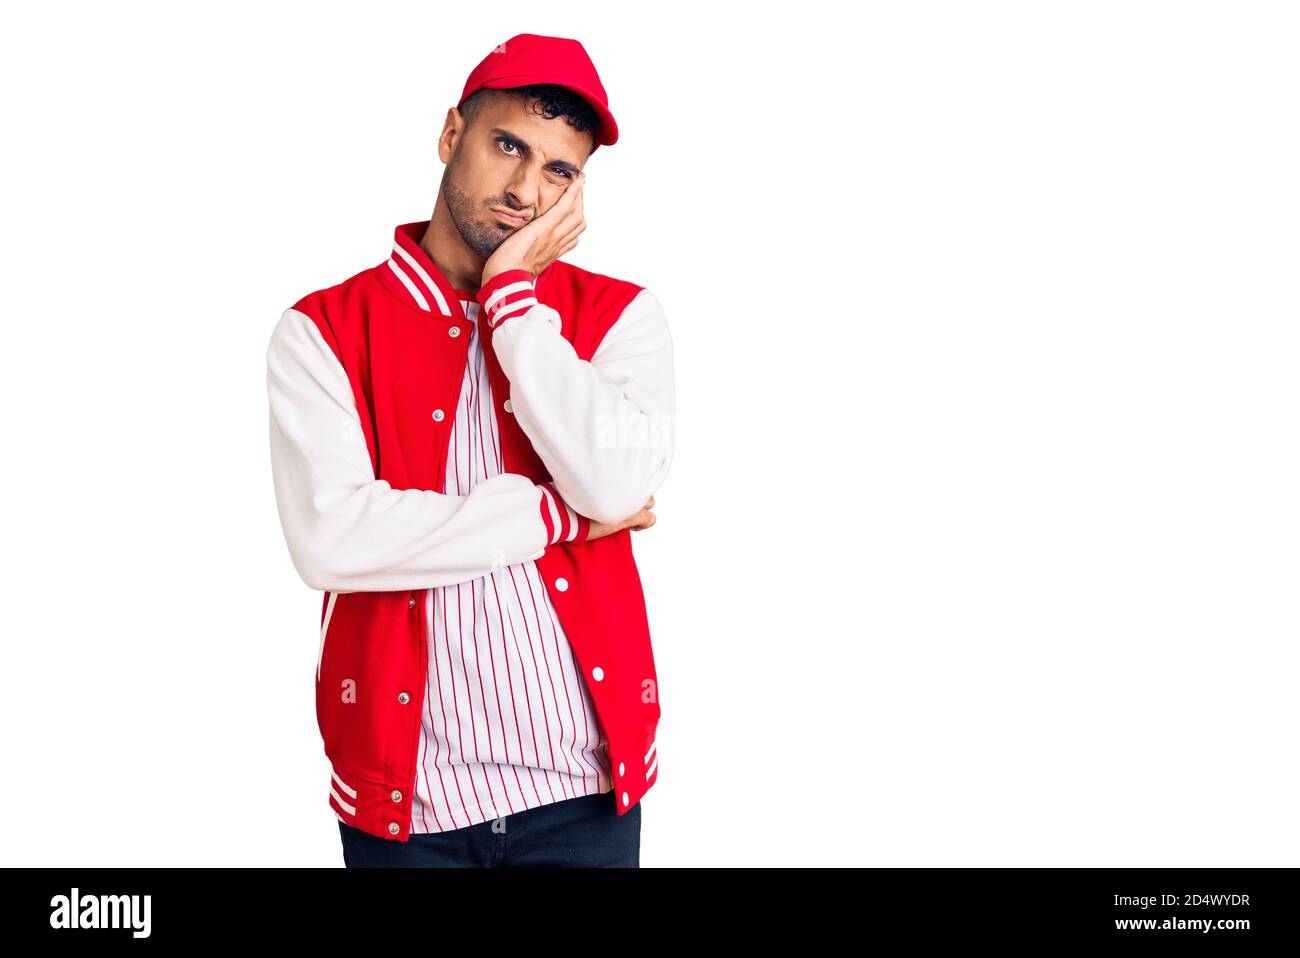 Young hispanic man wearing baseball uniform thinking looking tired and bored with depression problems with crossed arms. Stock Photo